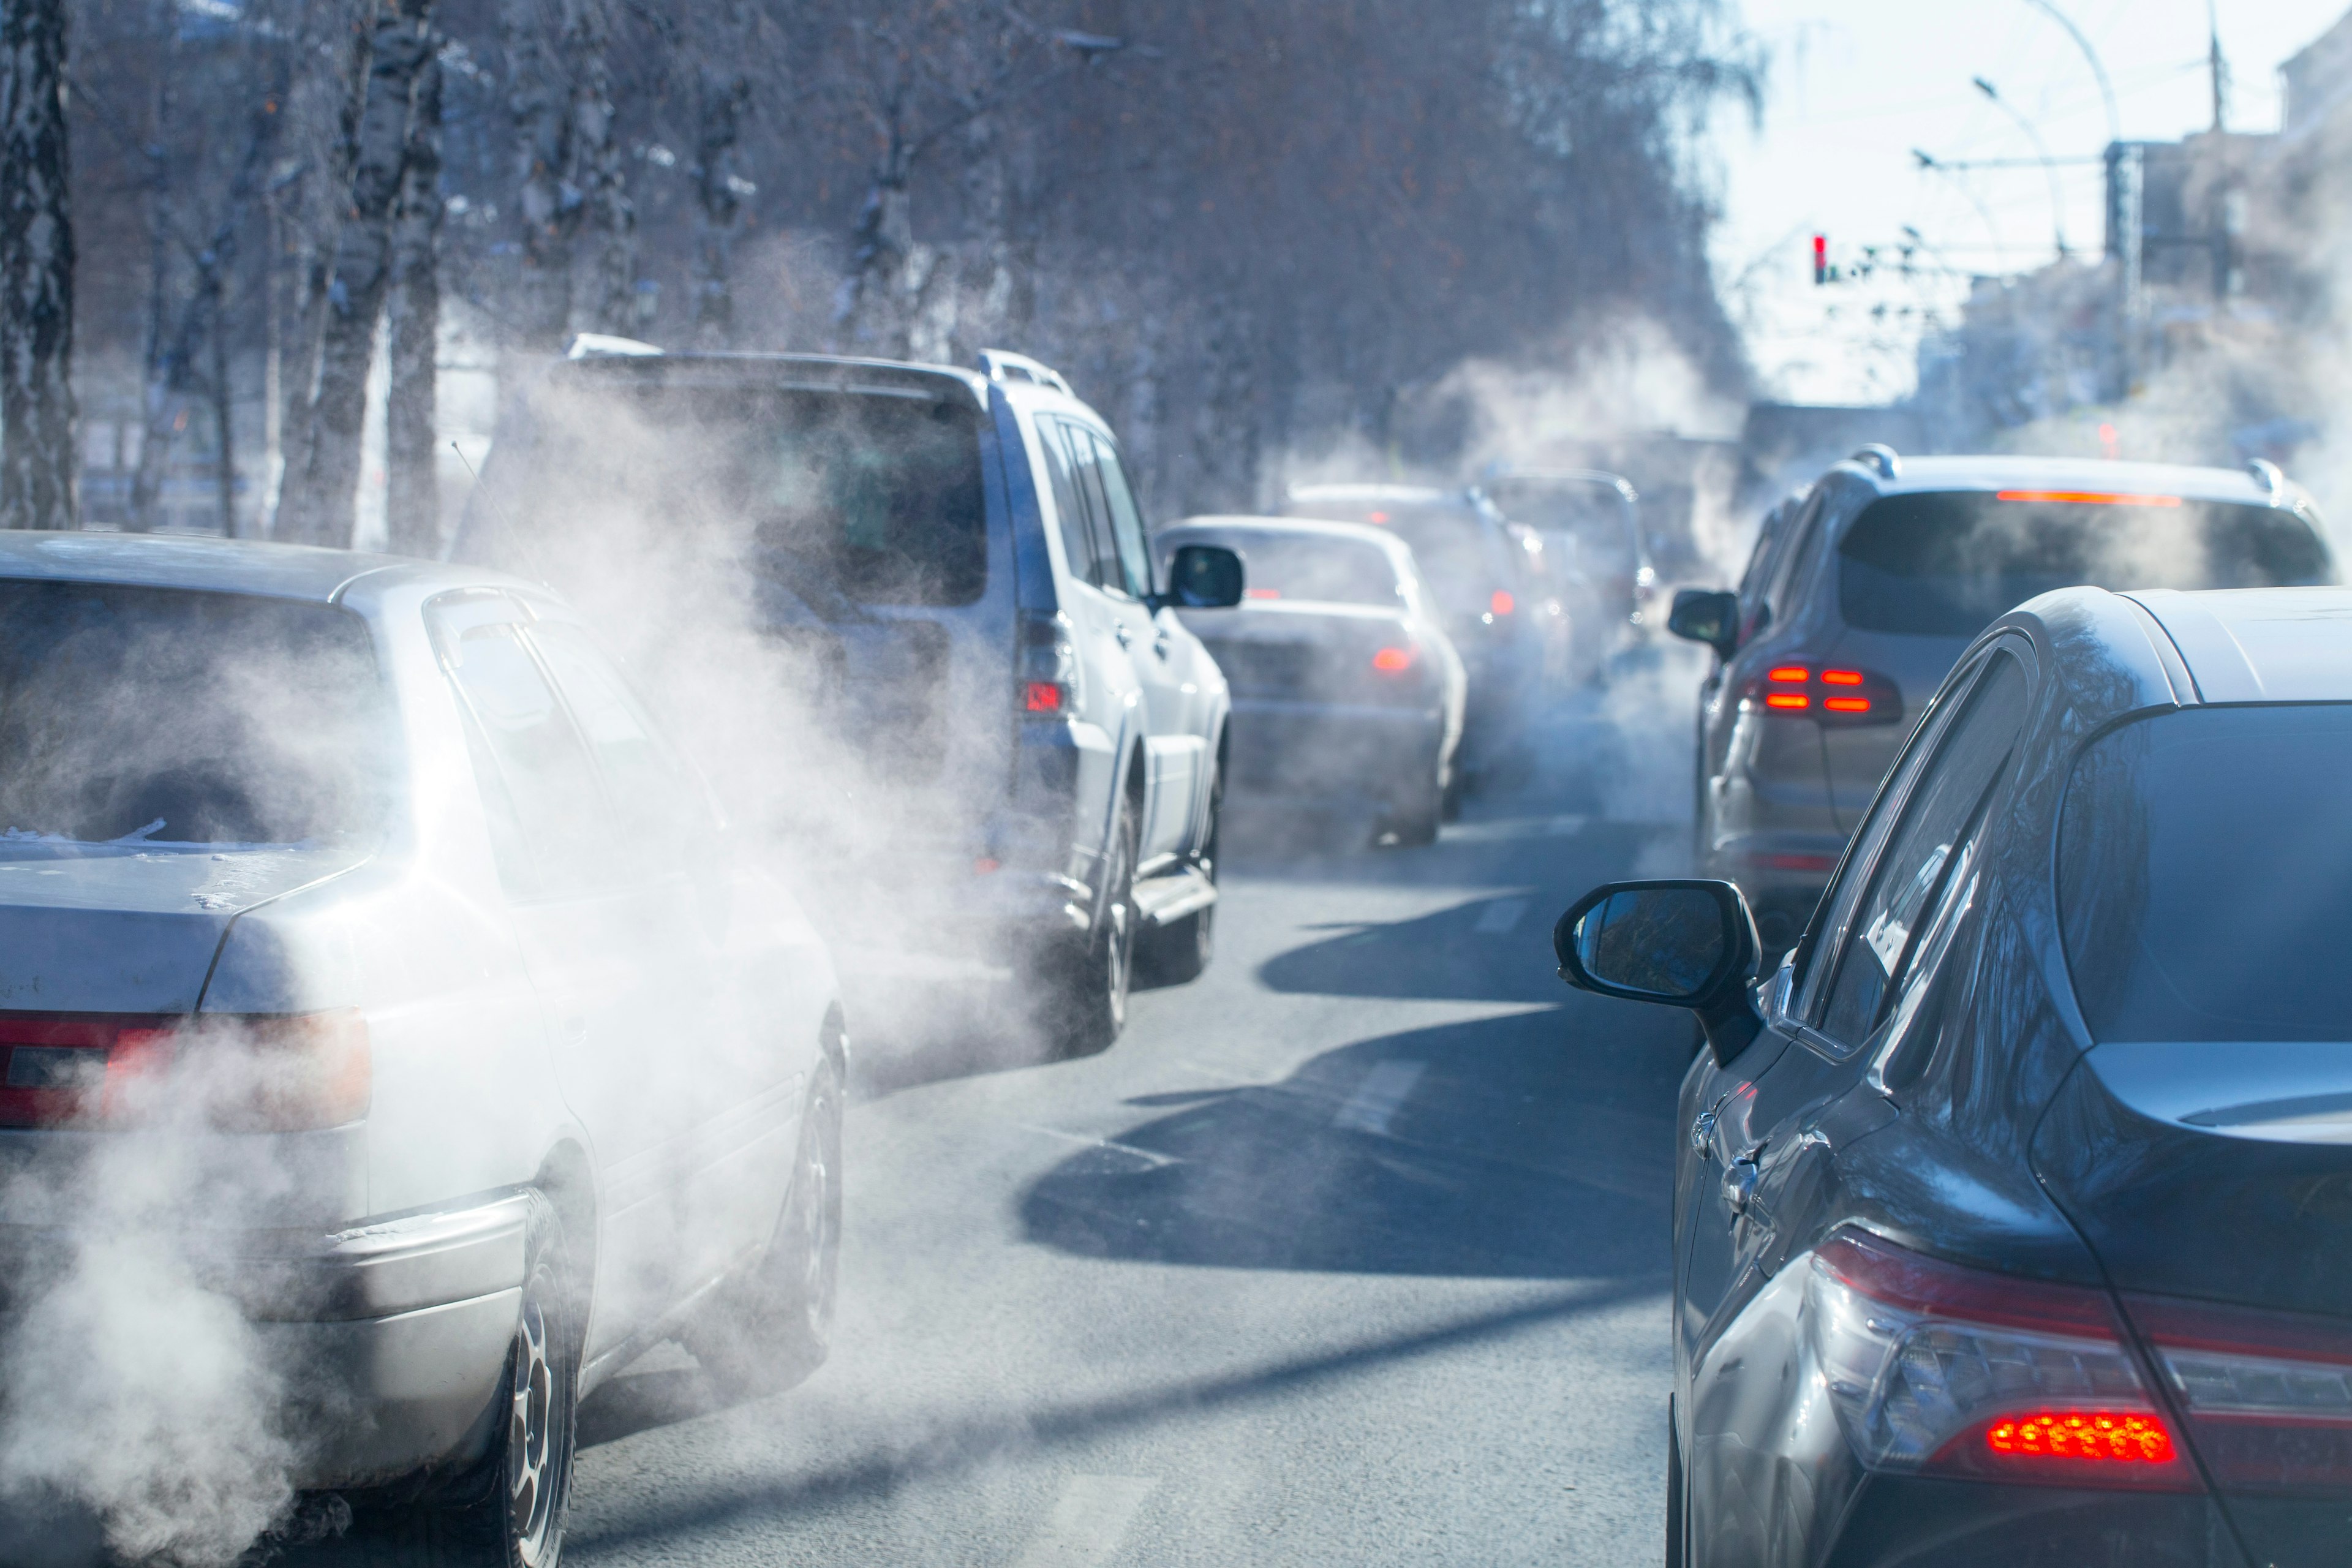 Idling vehicles during heavy traffic